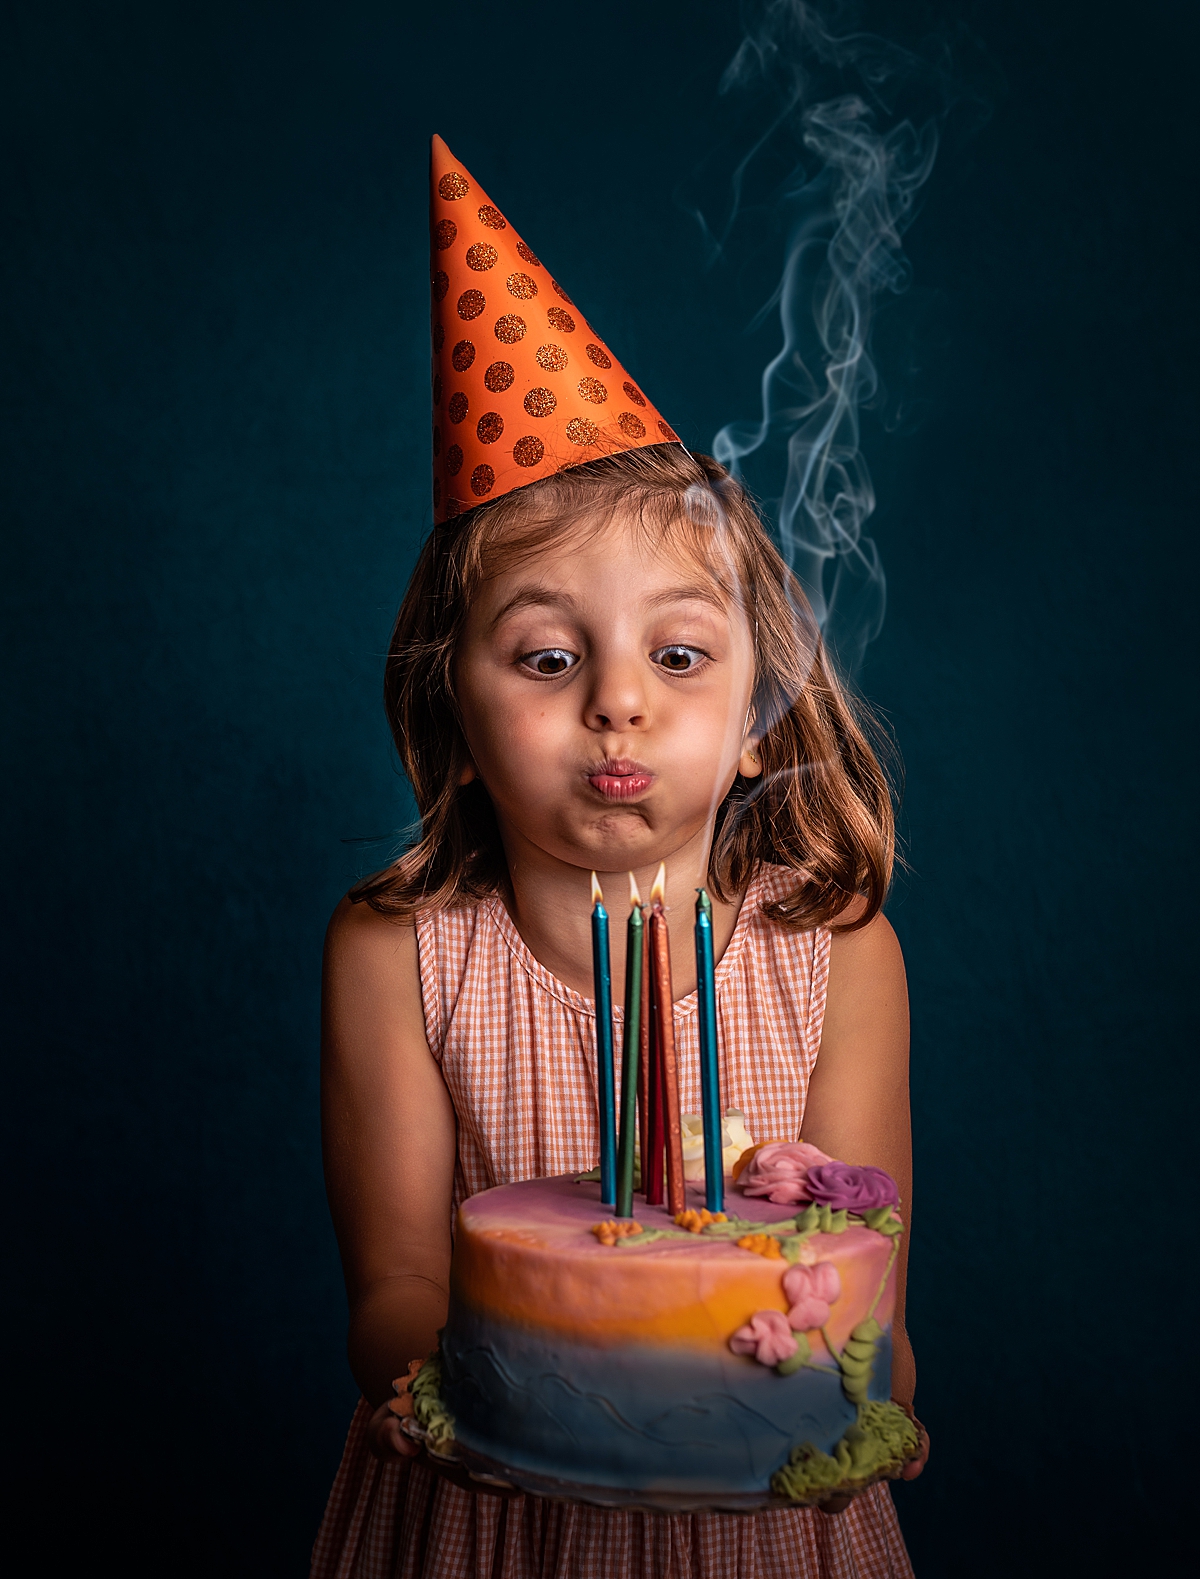 a little girl with an orange birthday hat on blowing out the candles on her birthday cake.